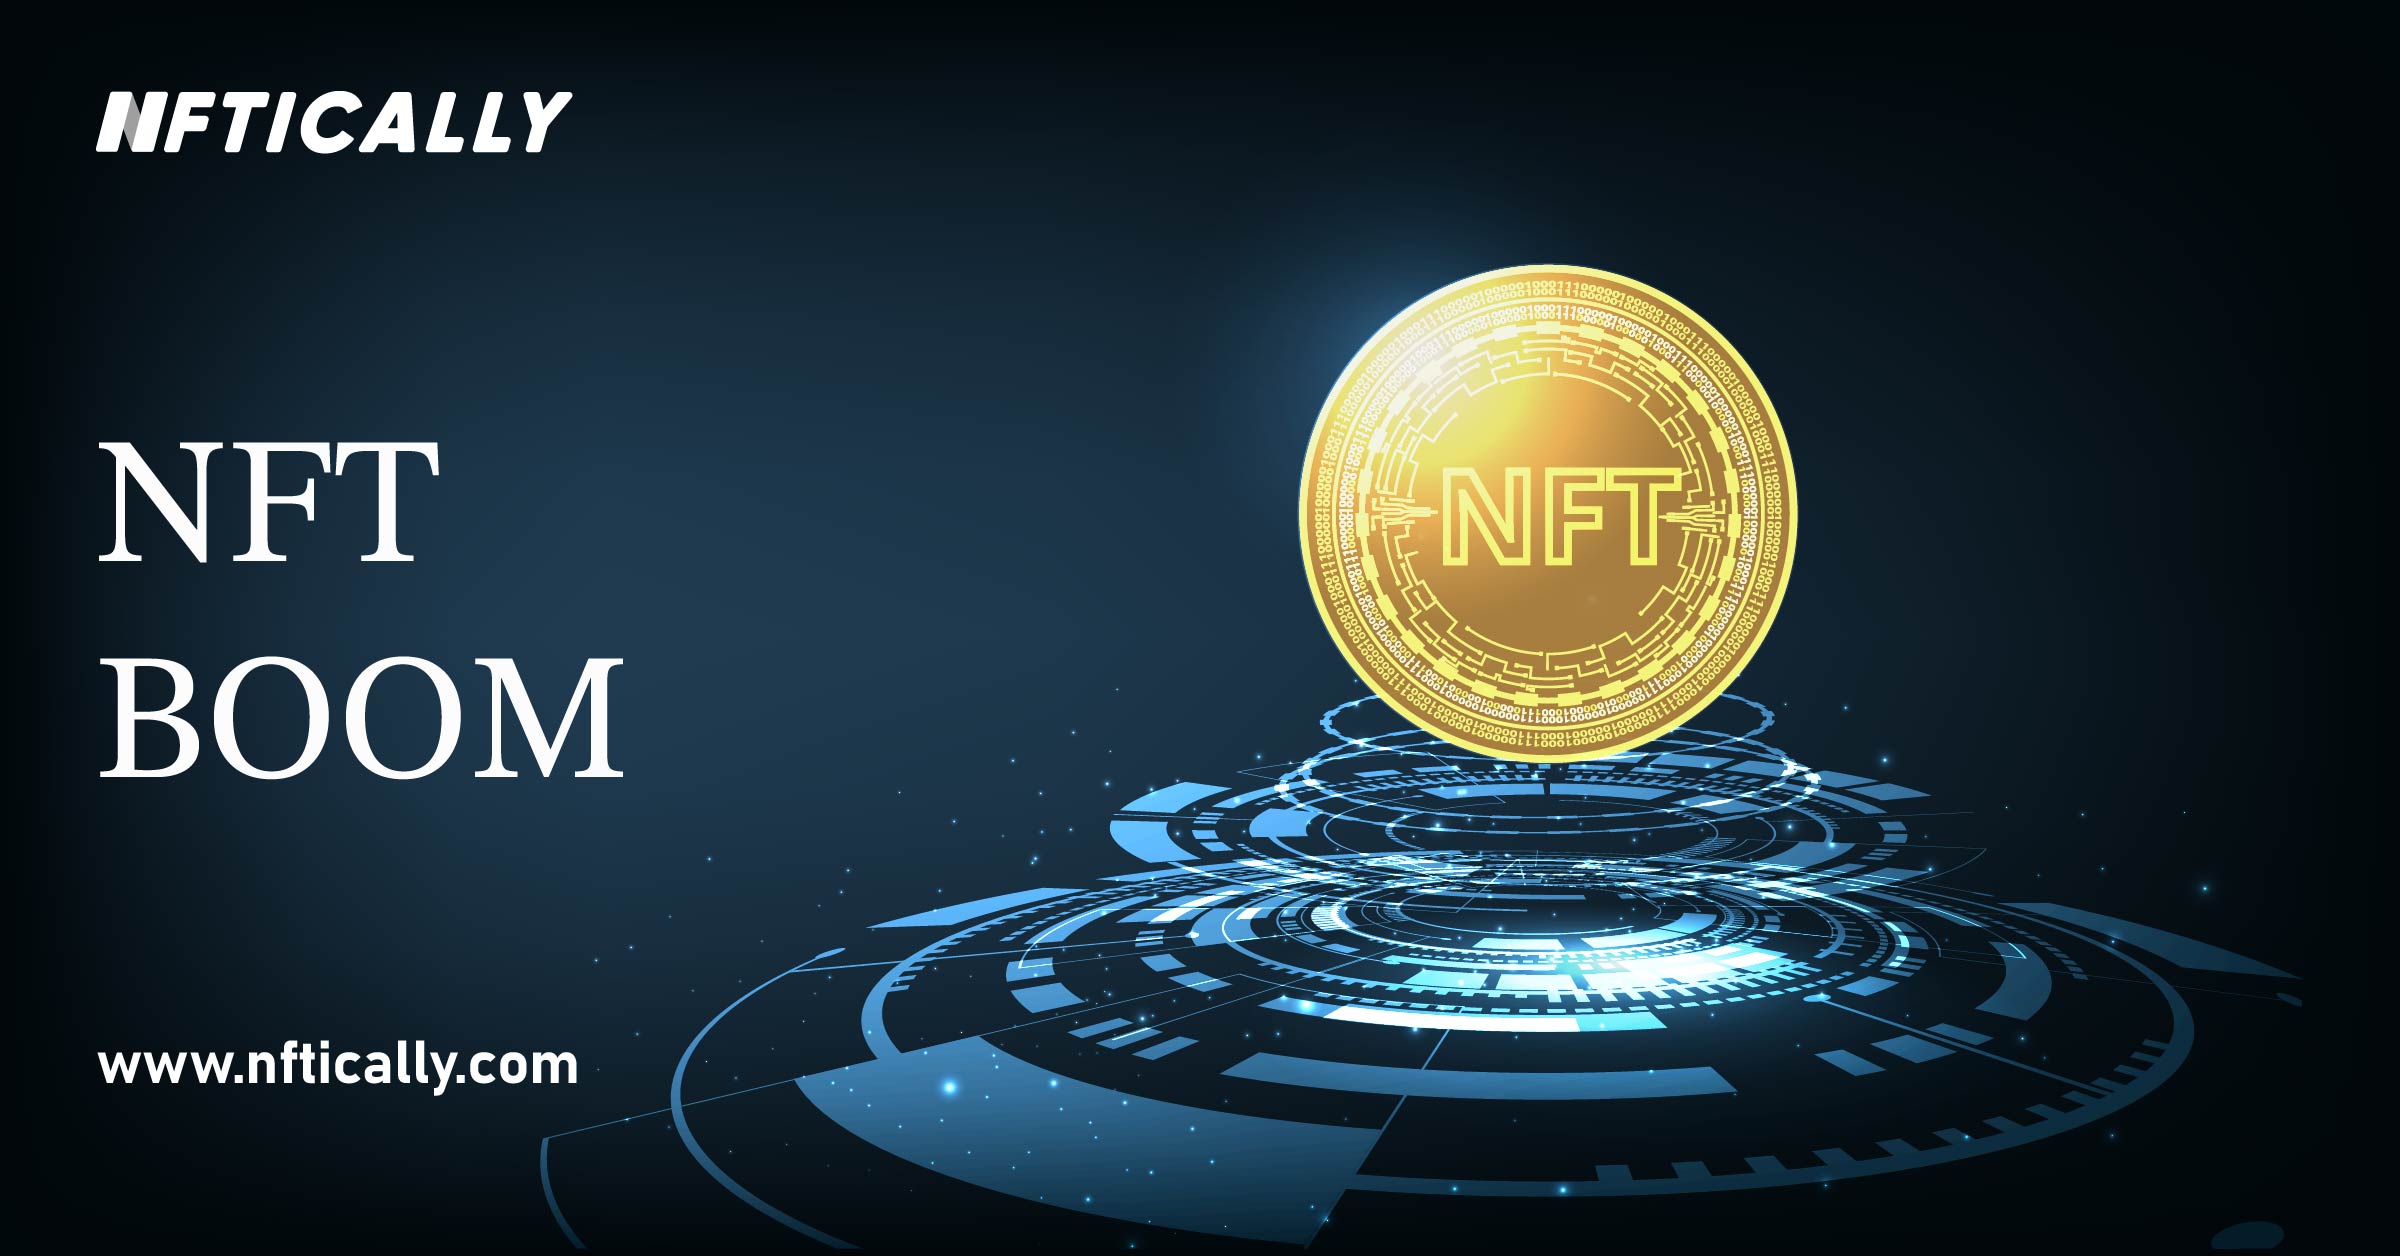 The NFT Boom | What Investors Need To Know